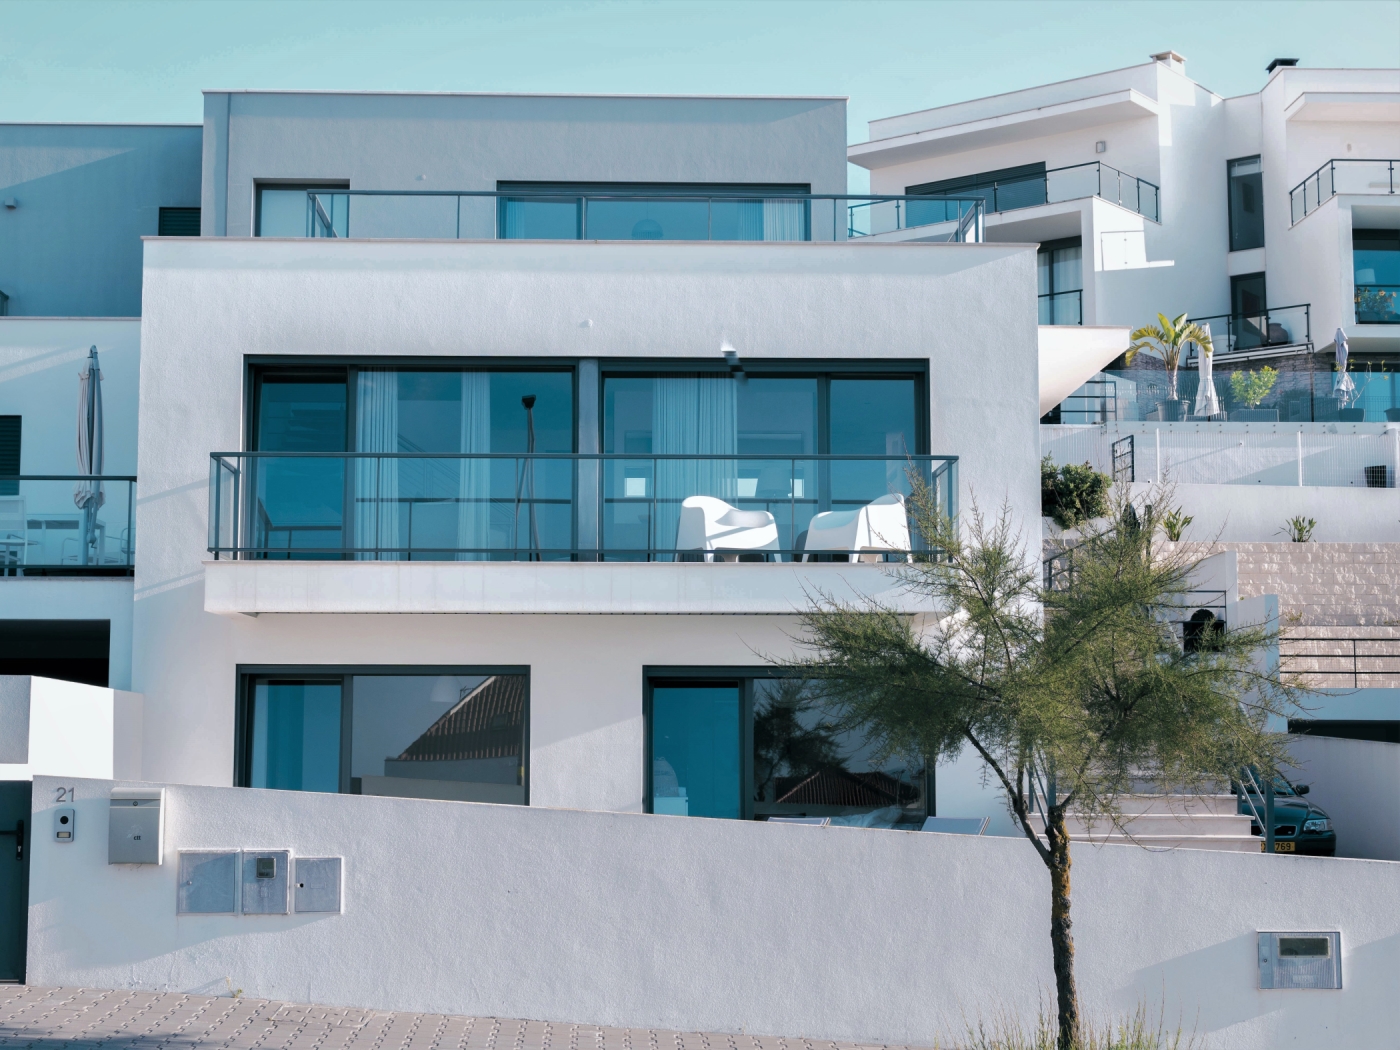 Luxurious 4-Bedroom Villa with seaview| 6 Beds, 3.5 Baths in Lourinhã